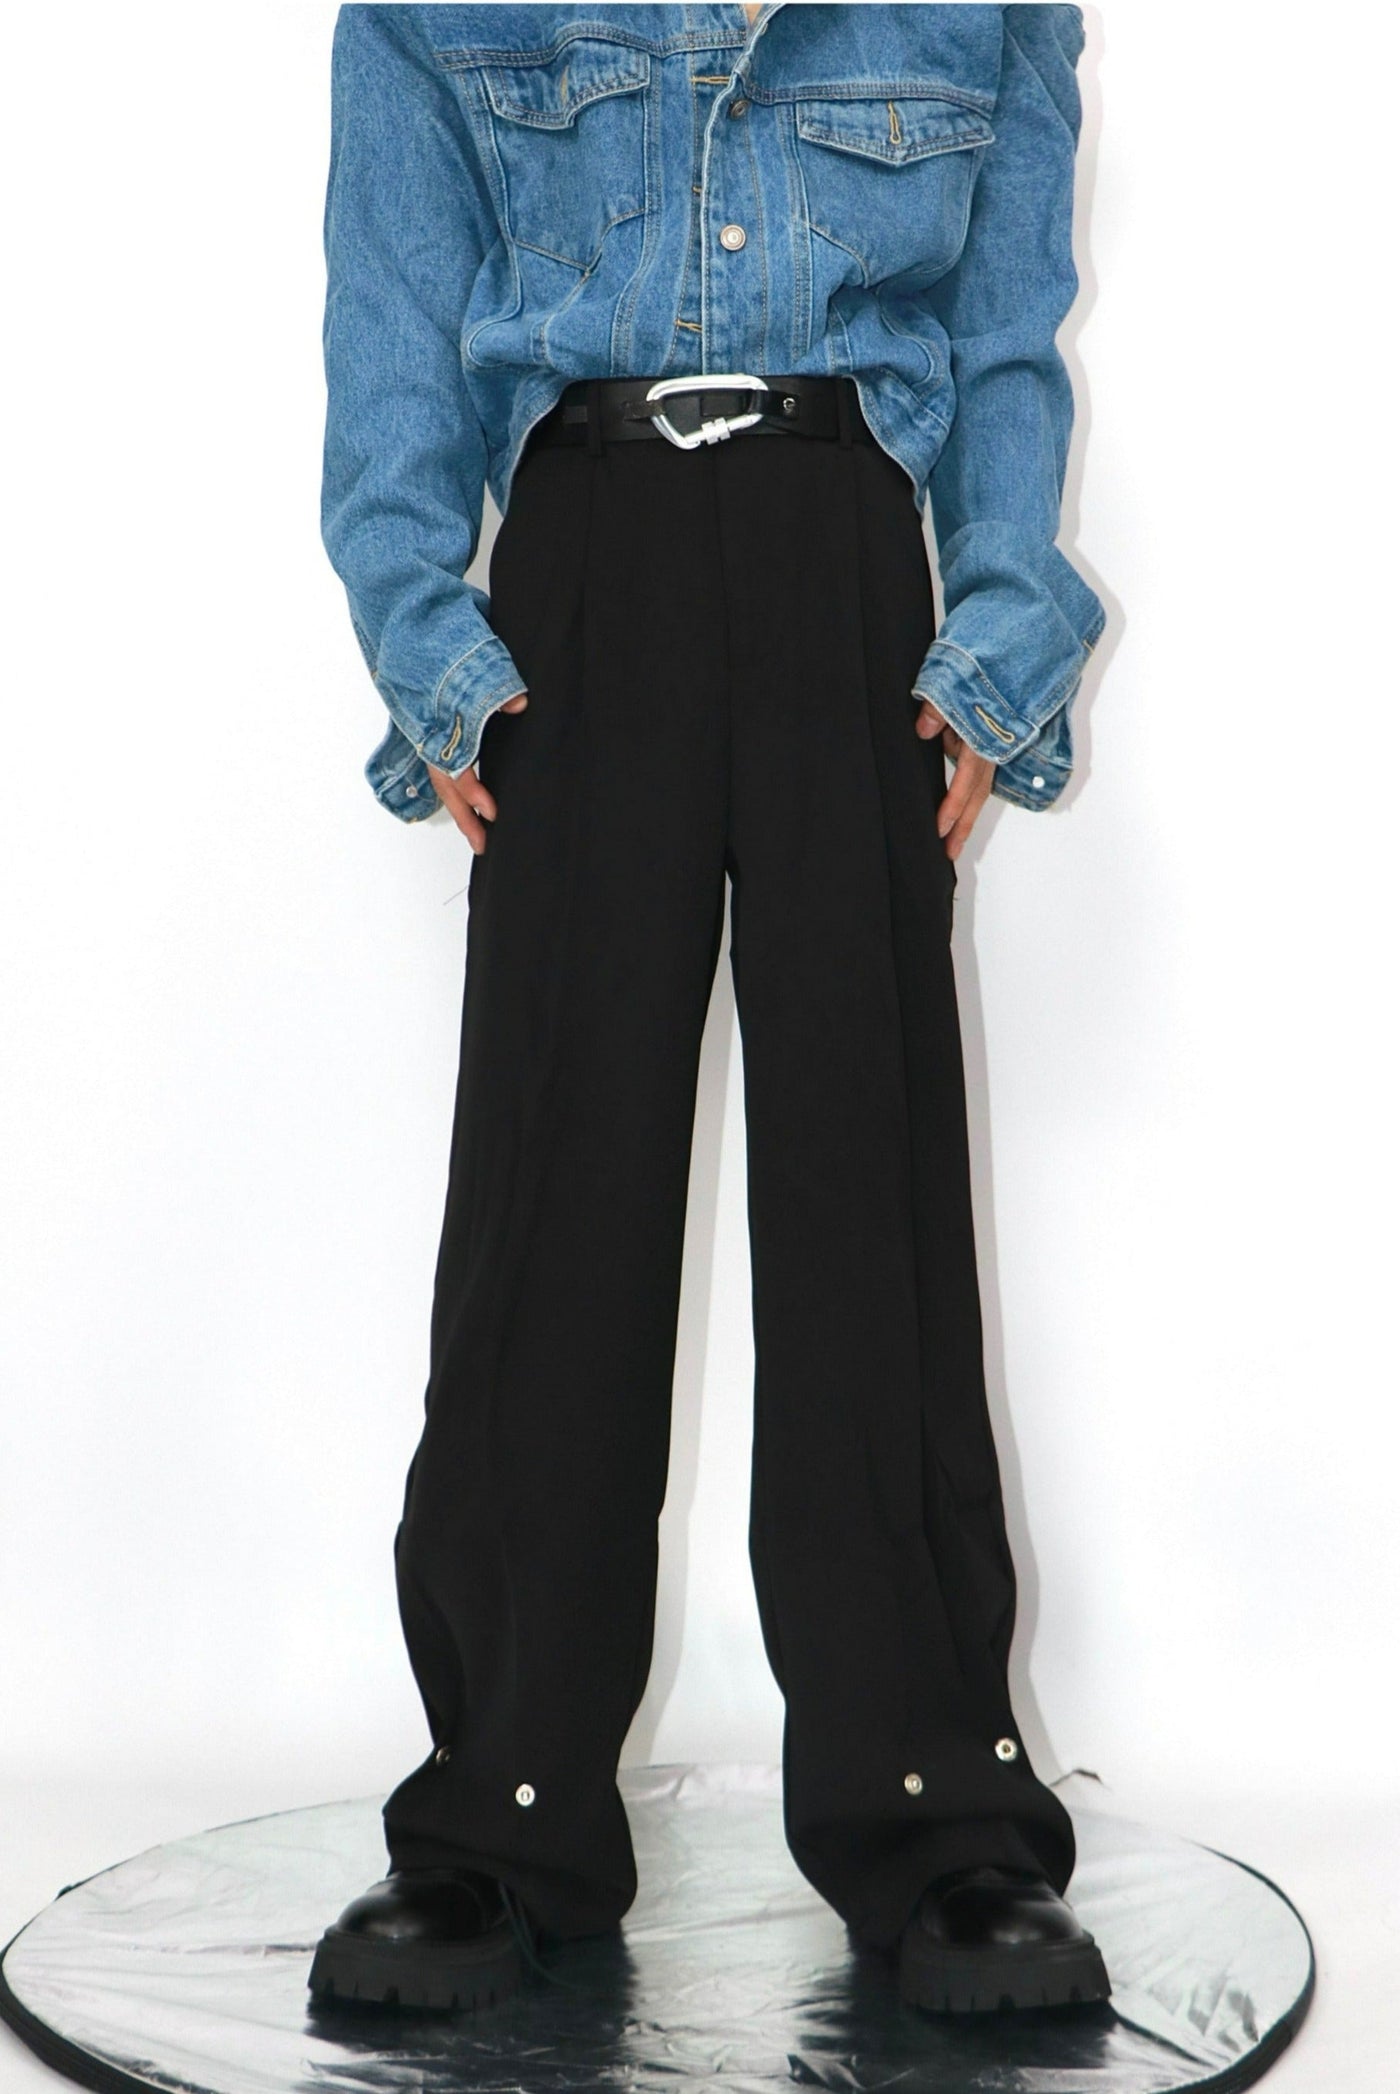 Buttoned Bootcut Trousers Korean Street Fashion Pants By Argue Culture Shop Online at OH Vault